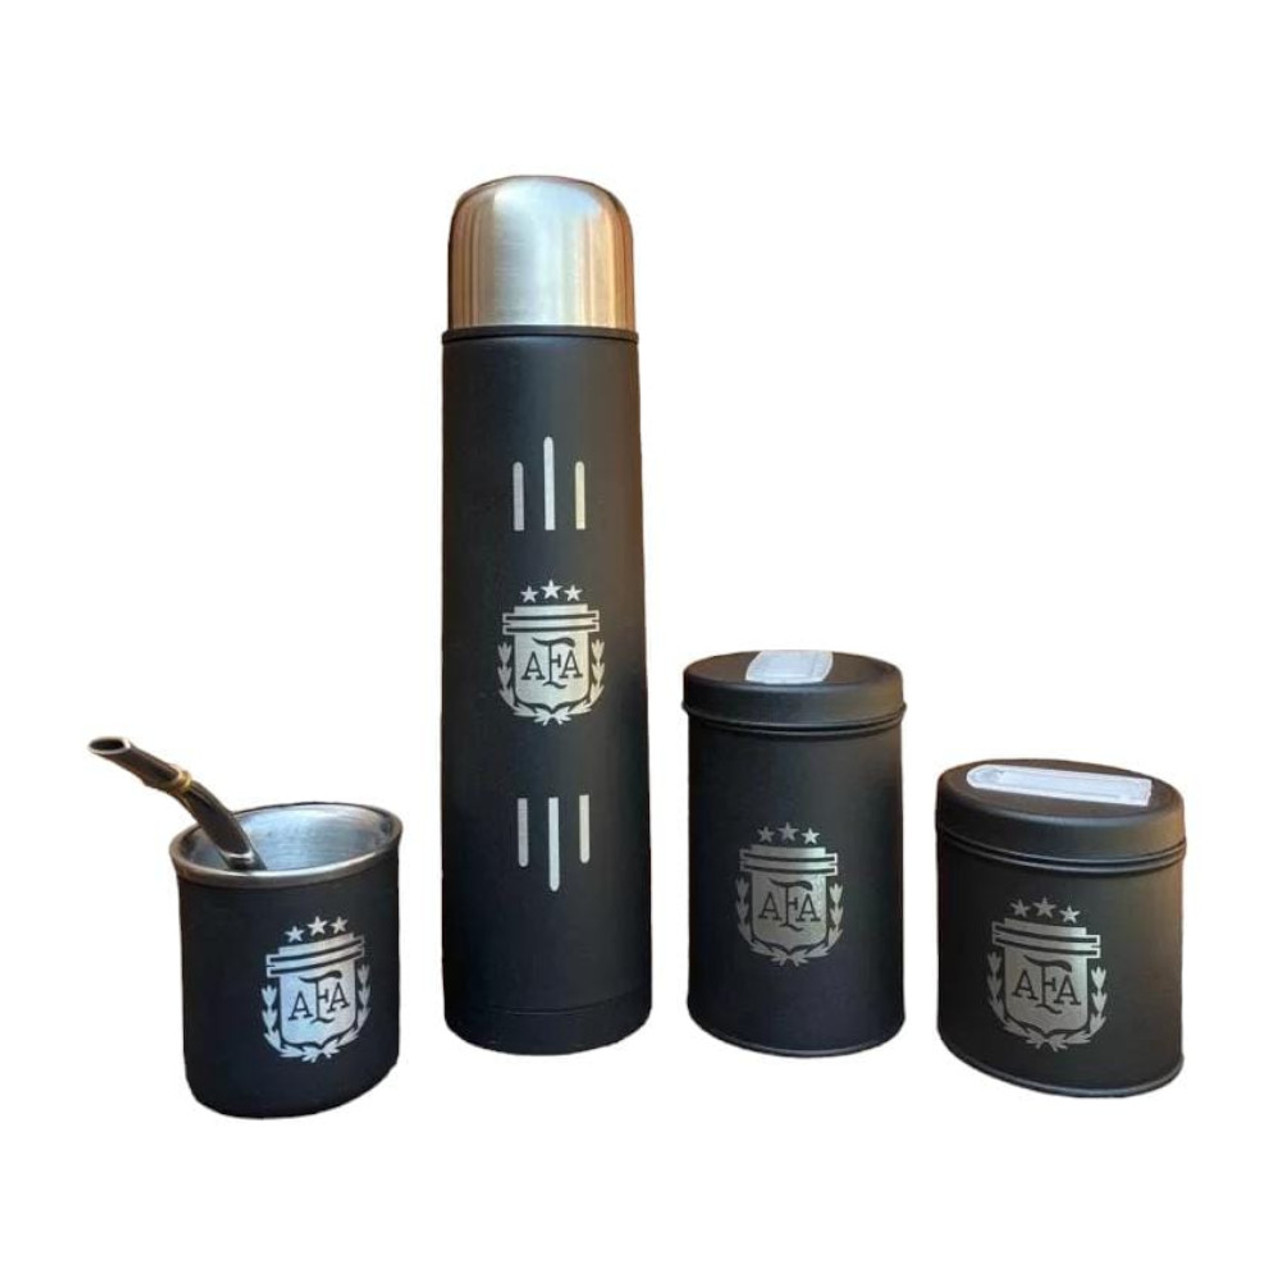 Mate & Yerba Mate - Accessories - Thermos - Pampa Direct